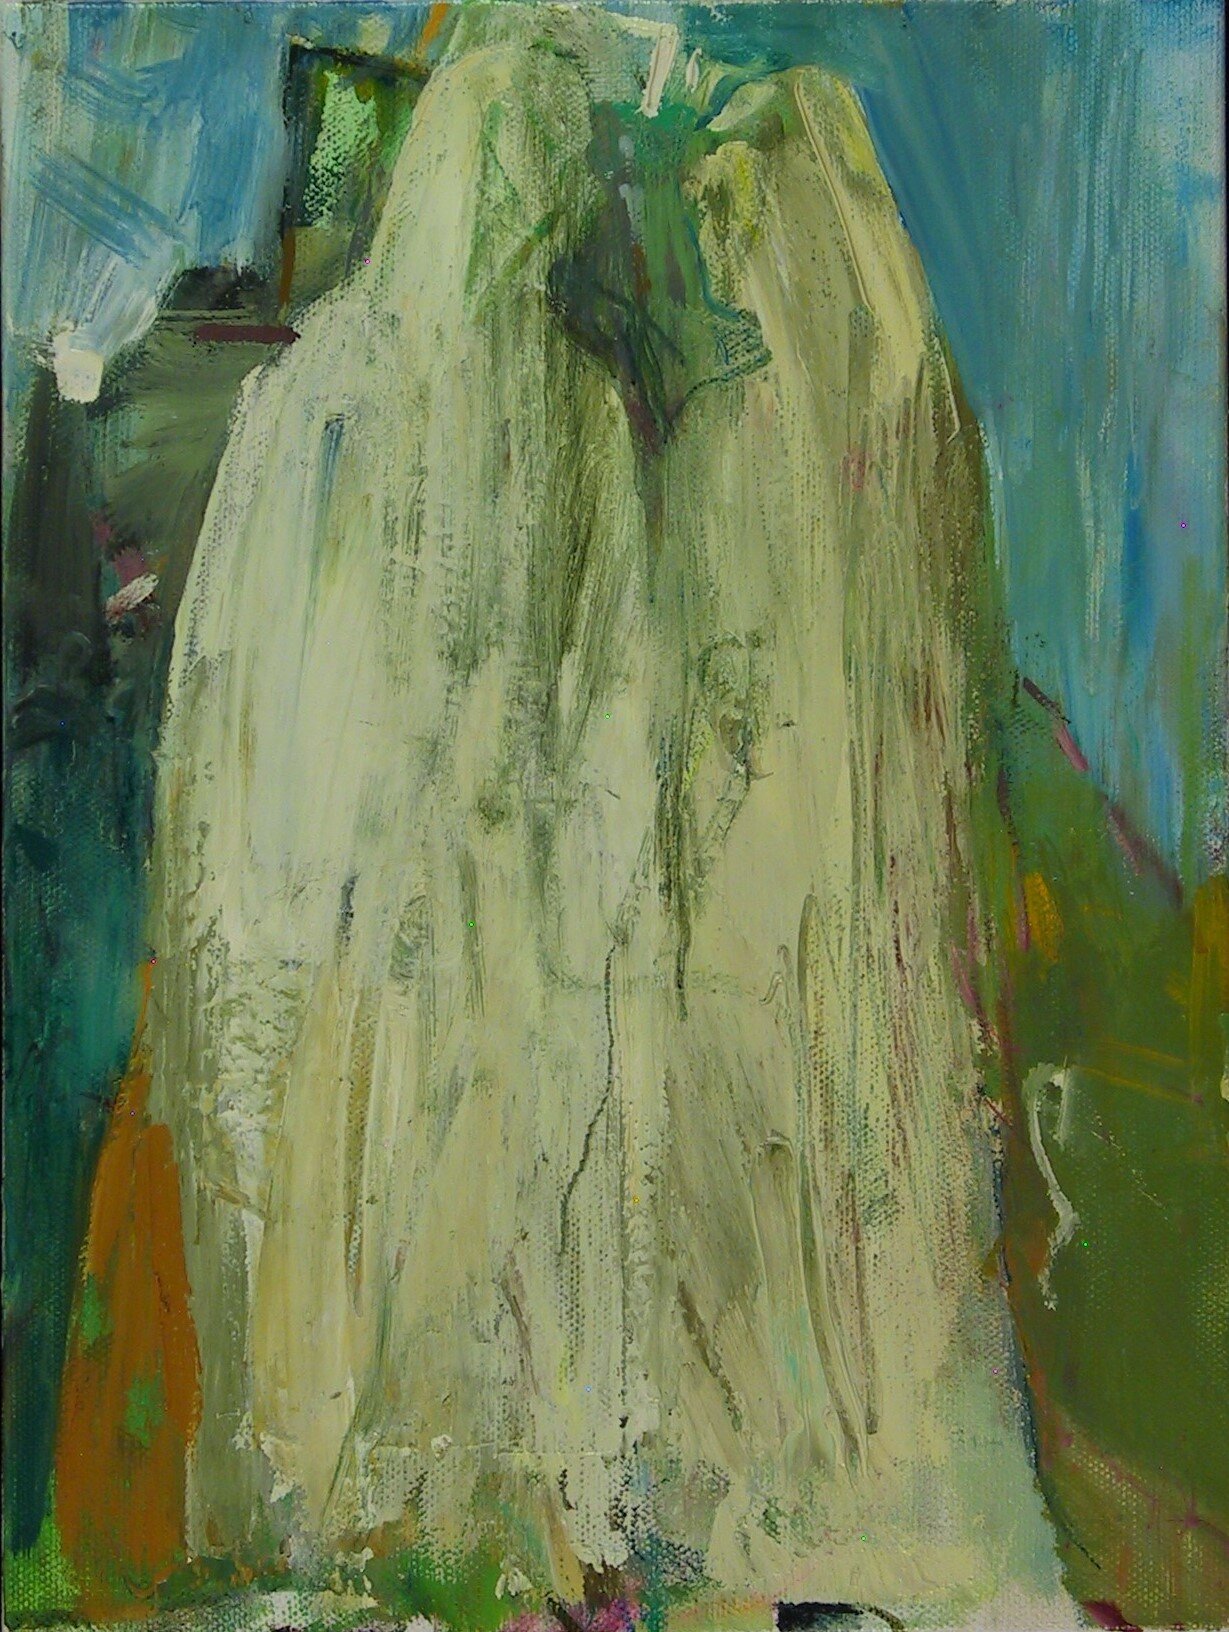 The Visitation  2020  oil on canvas  12” x 9”